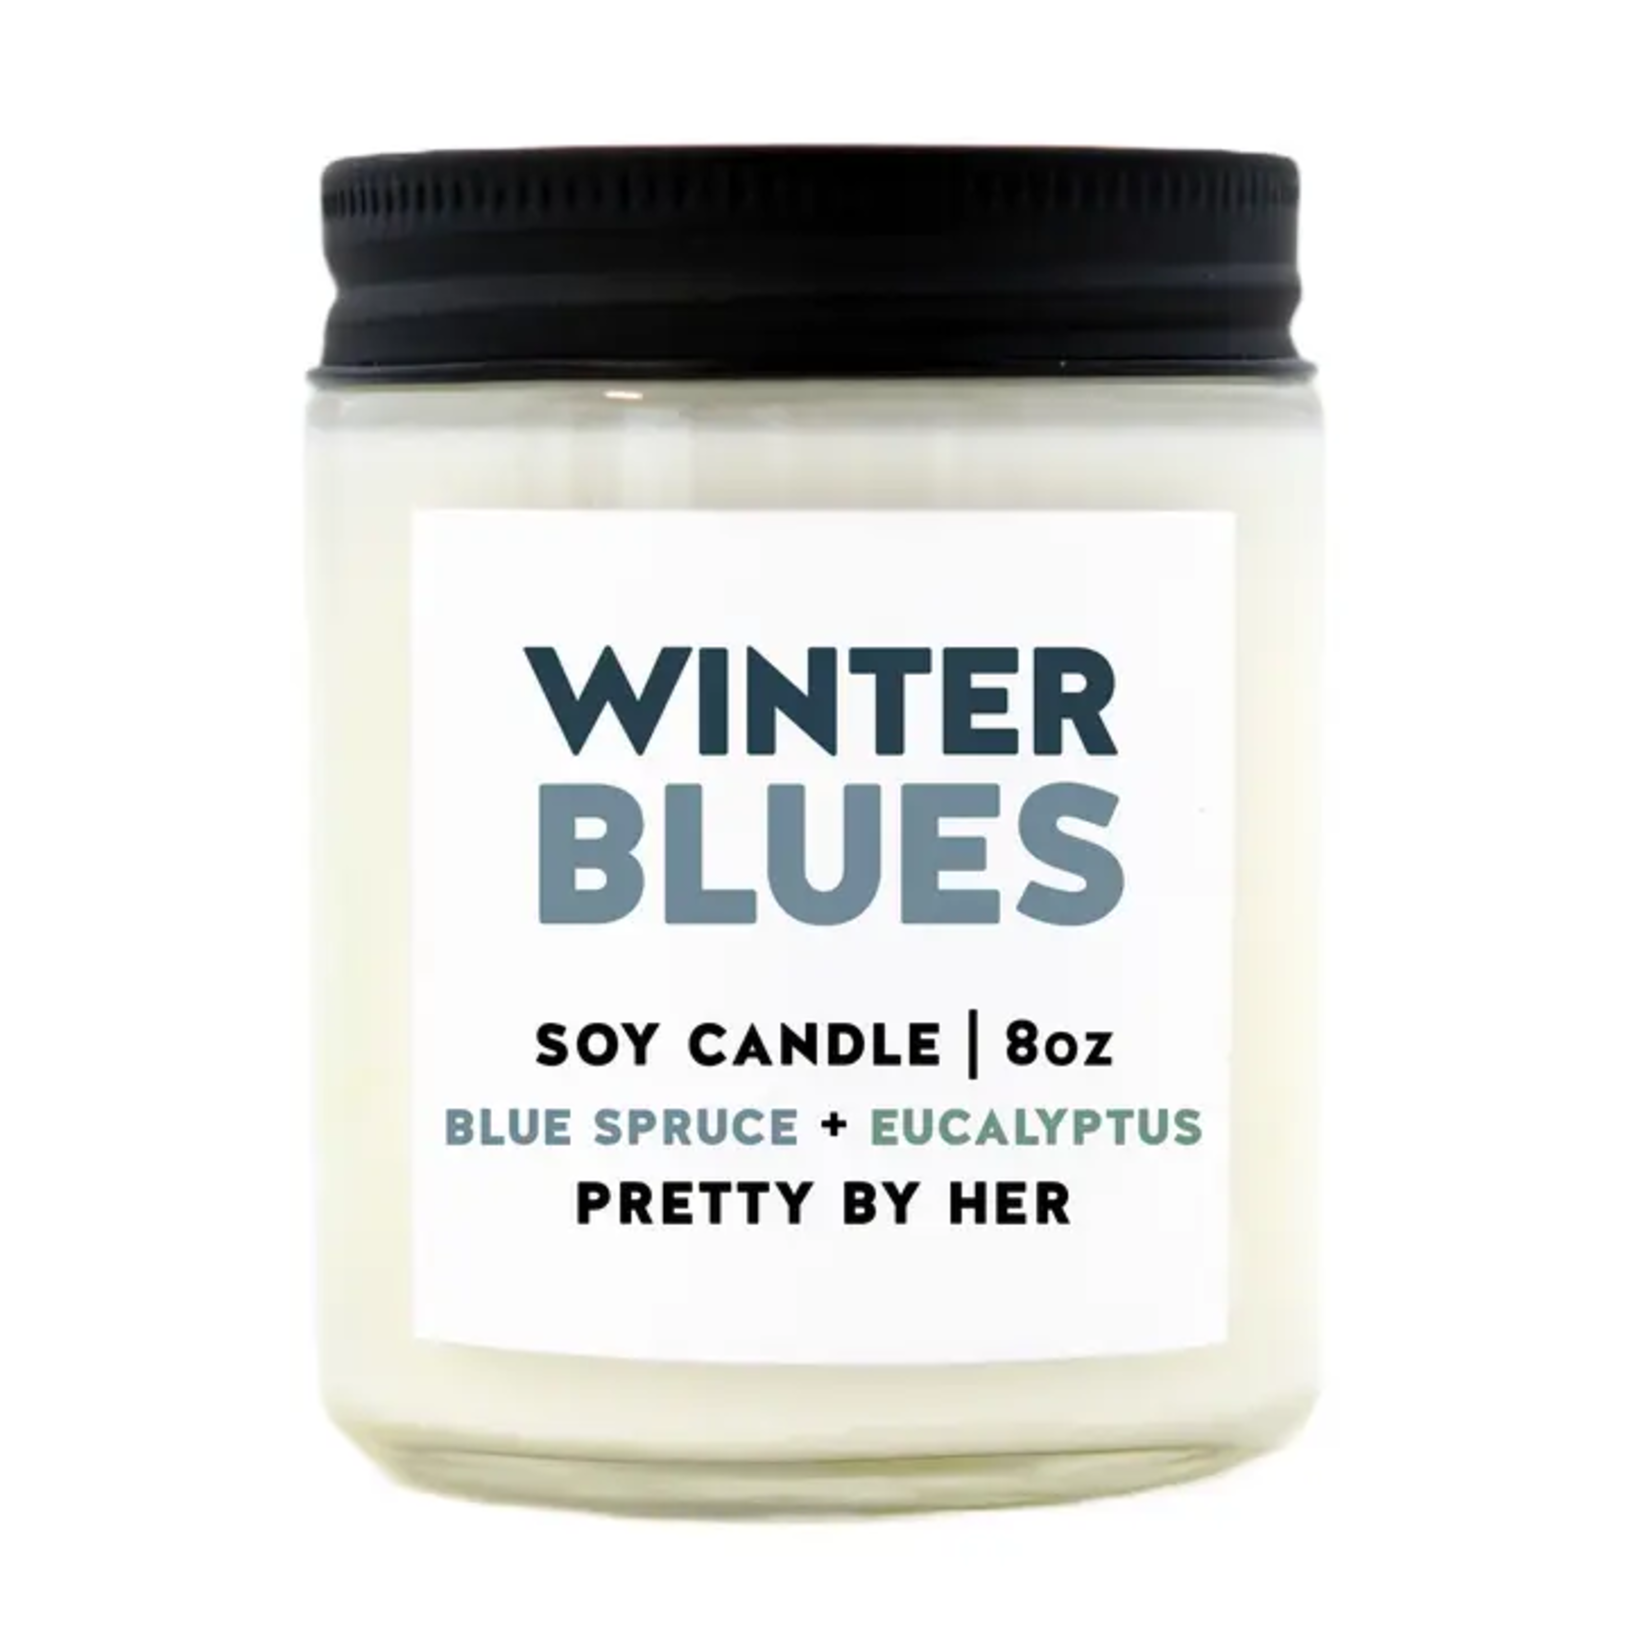 Soy Candle - Winter Blues